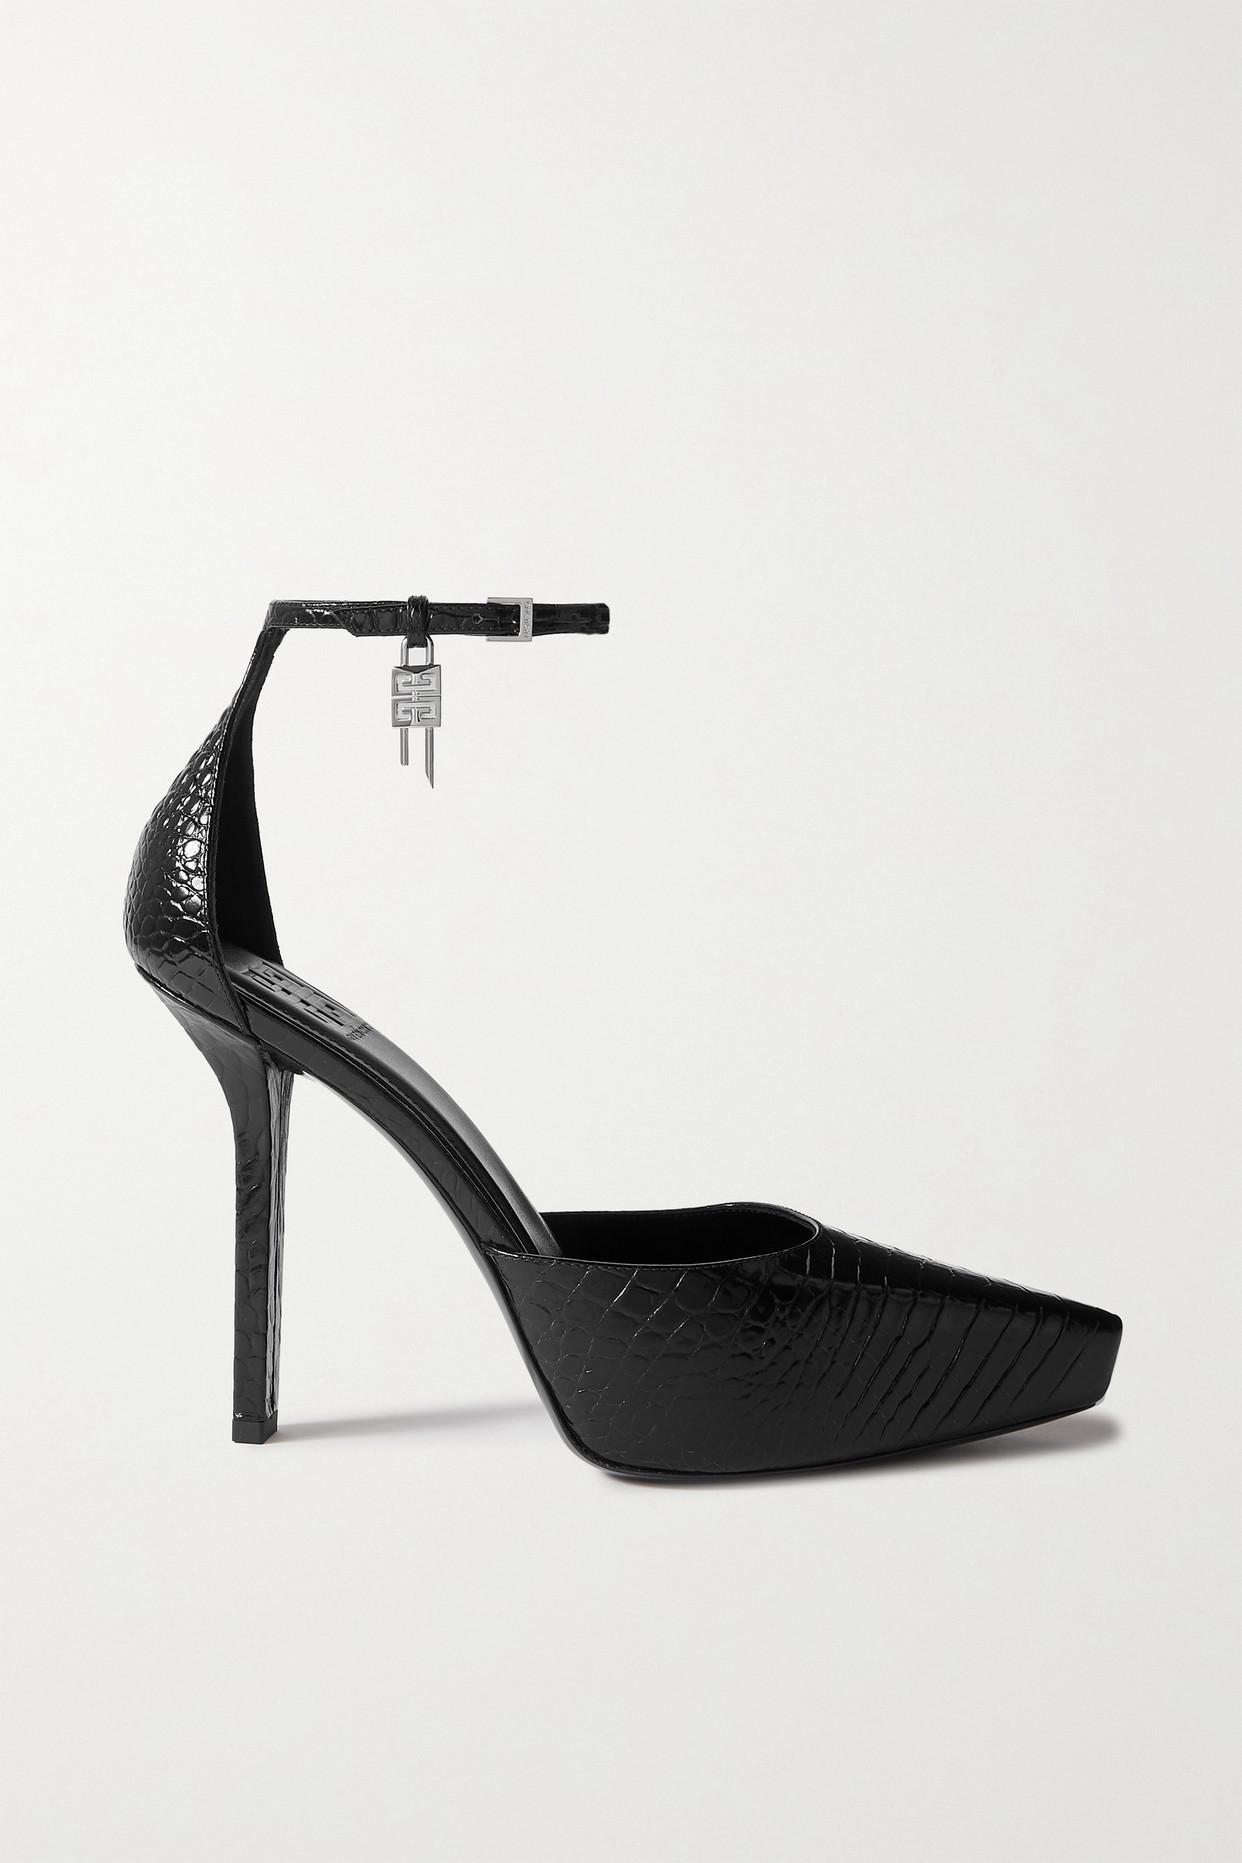 Givenchy G-lock Croc-effect Leather Platform Pumps in White | Lyst